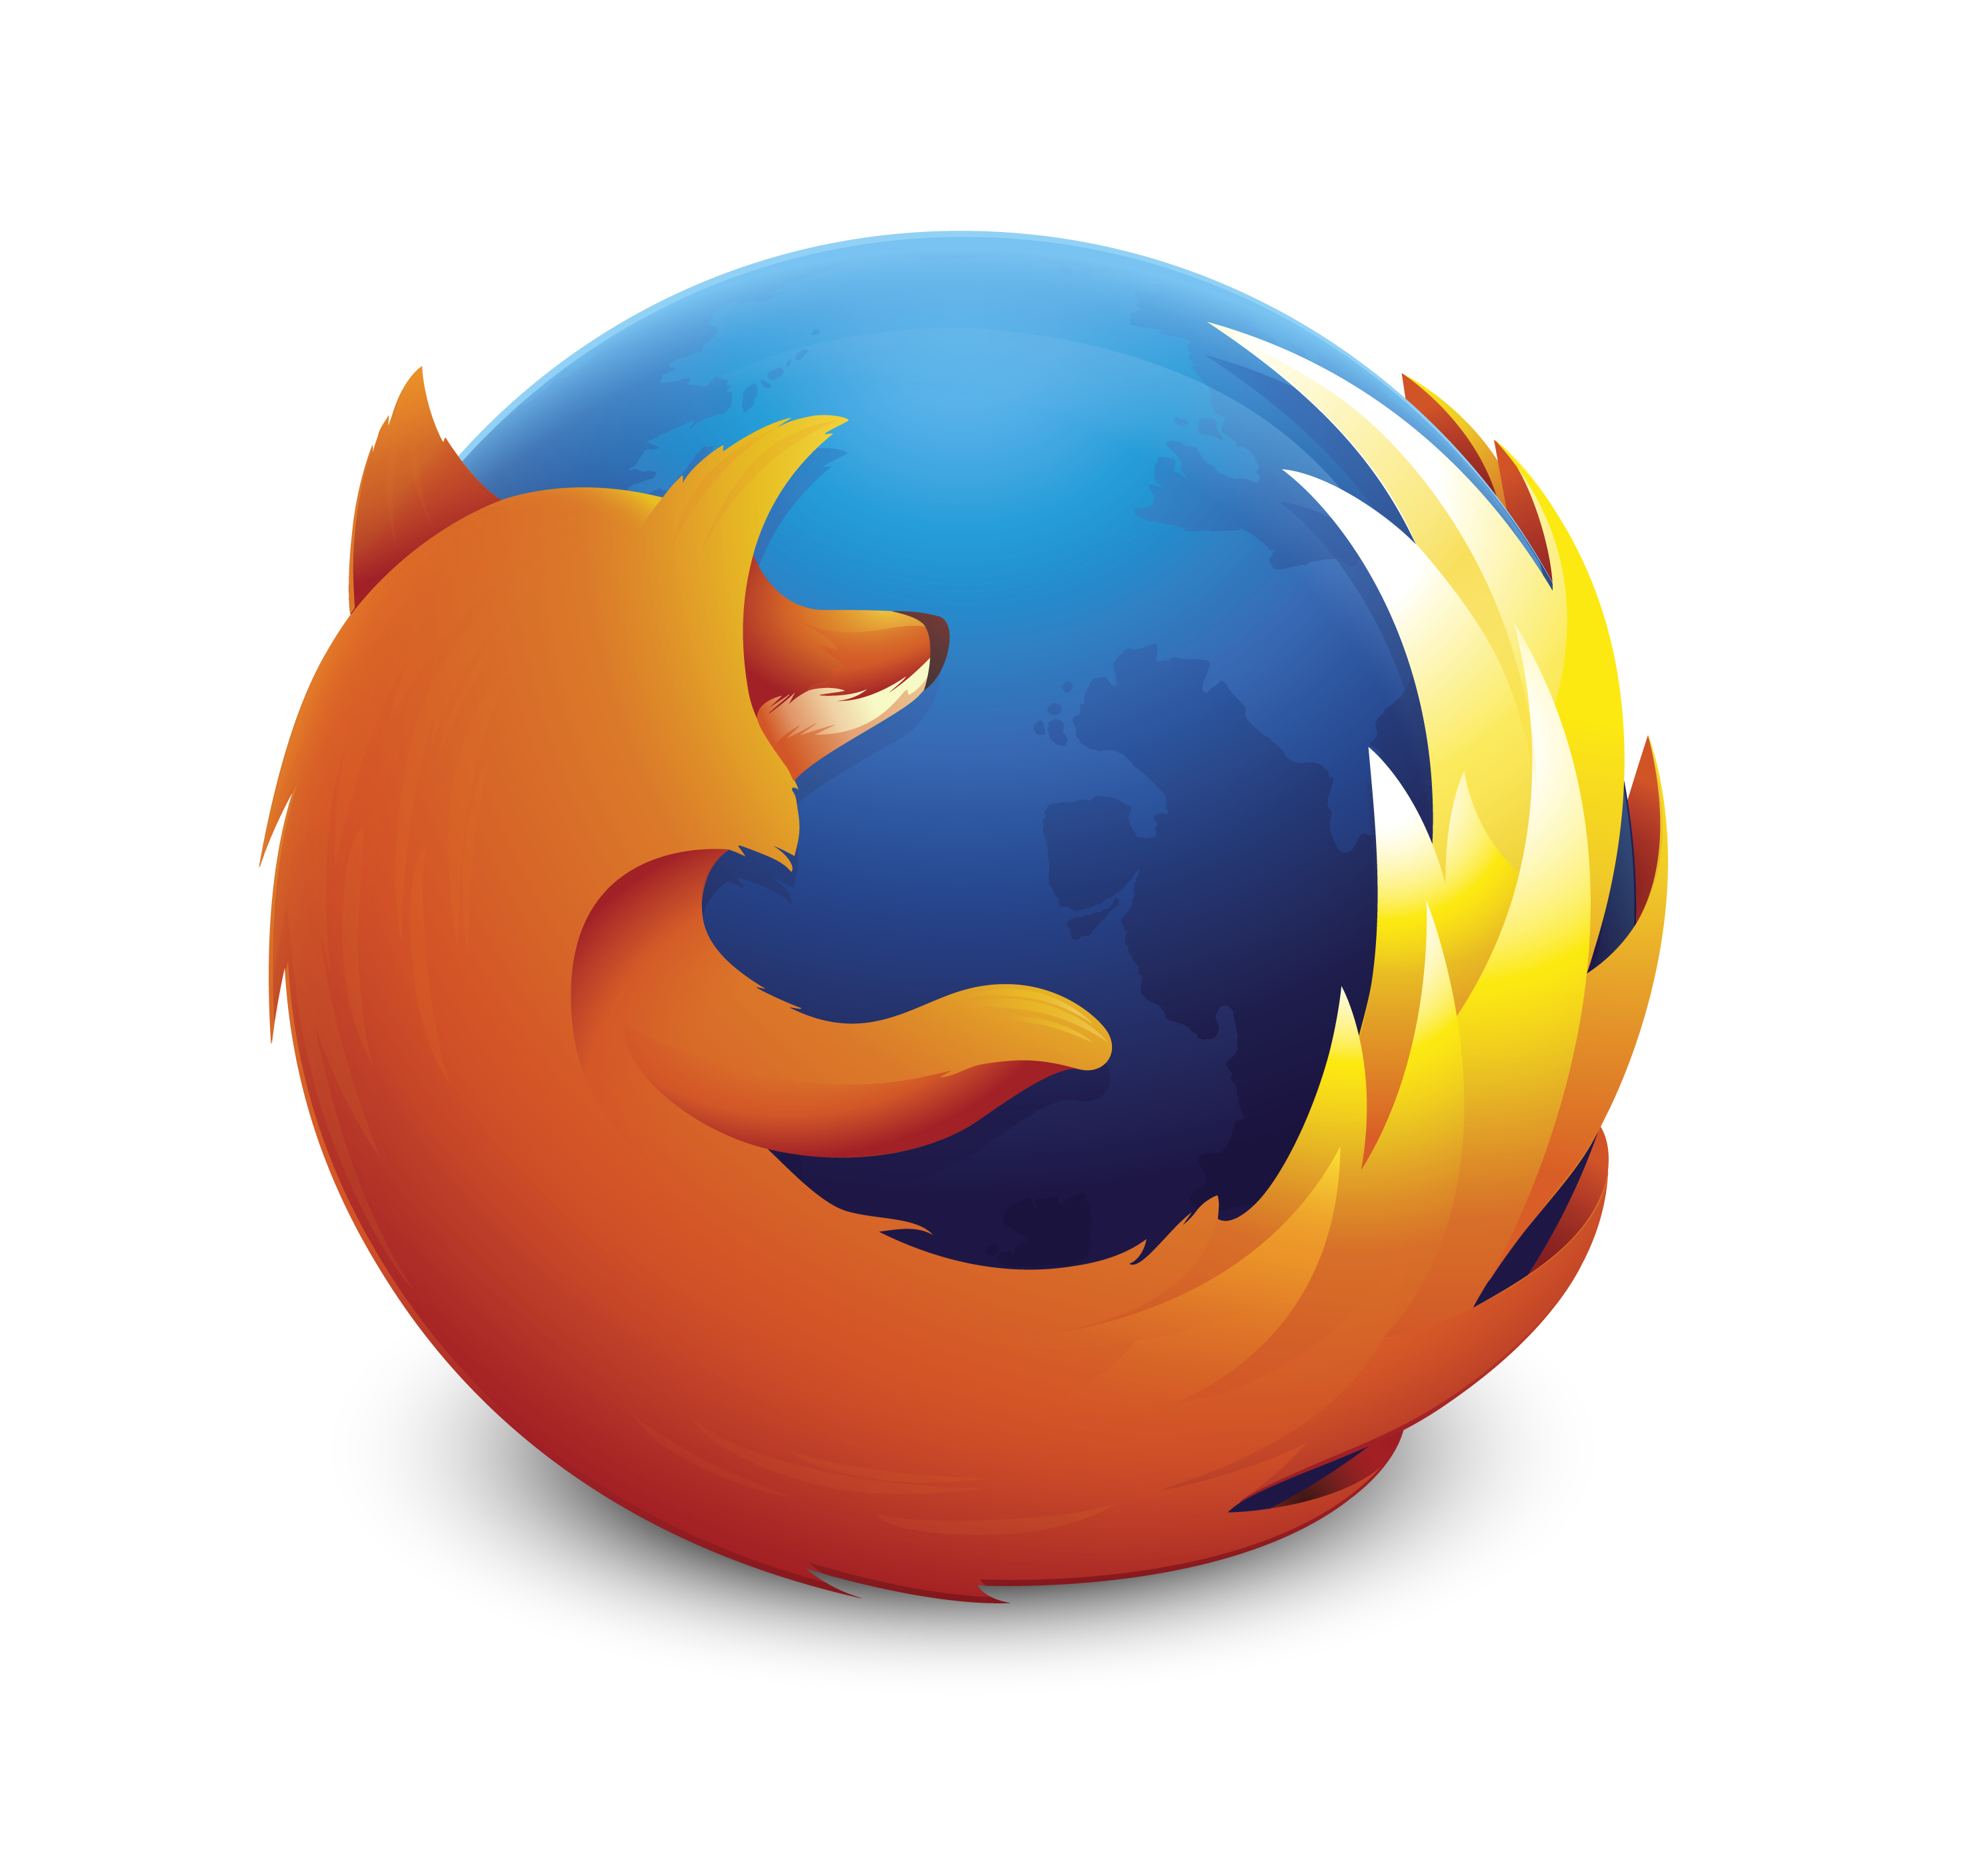 image showing the logo of Firefox